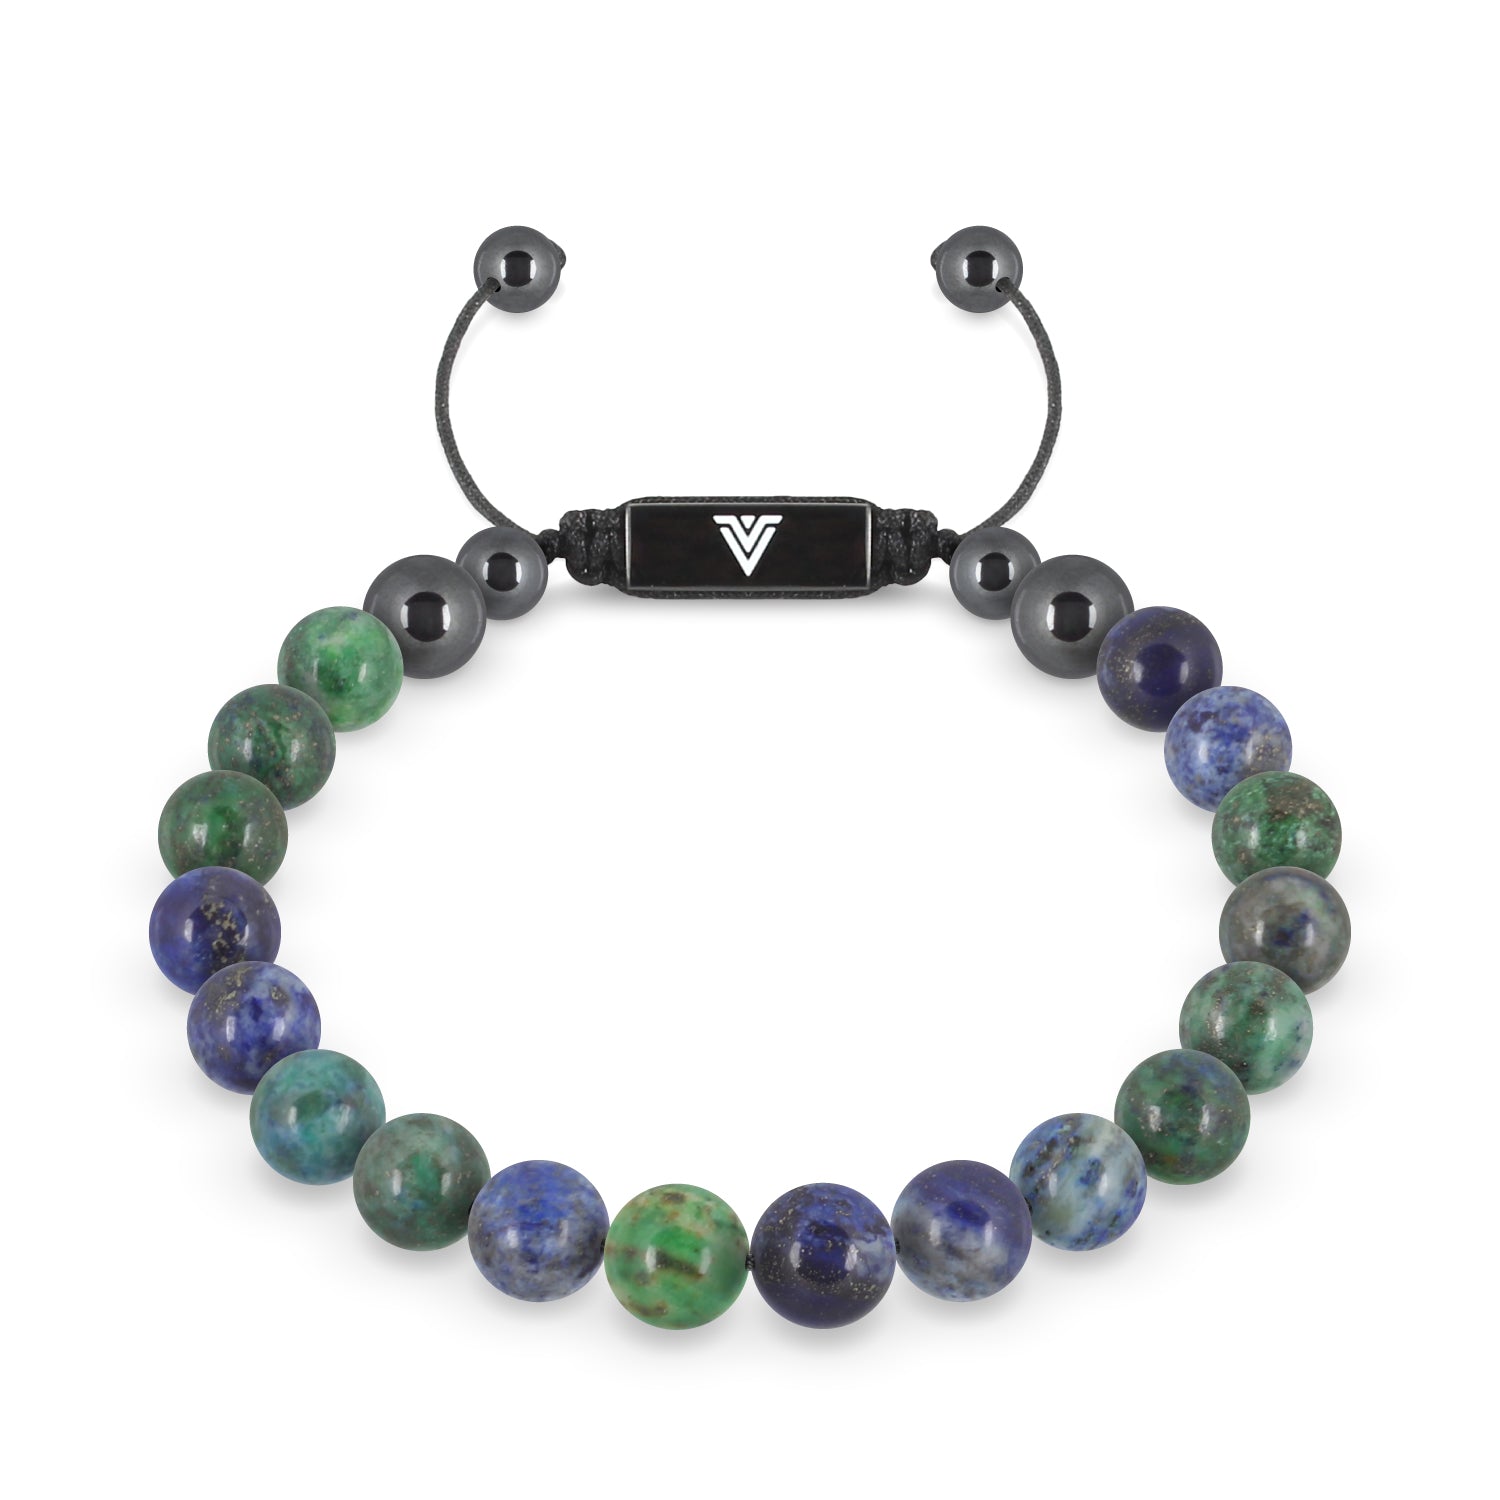 Front view of an 8mm Azurite crystal beaded shamballa bracelet with black stainless steel logo bead made by Voltlin